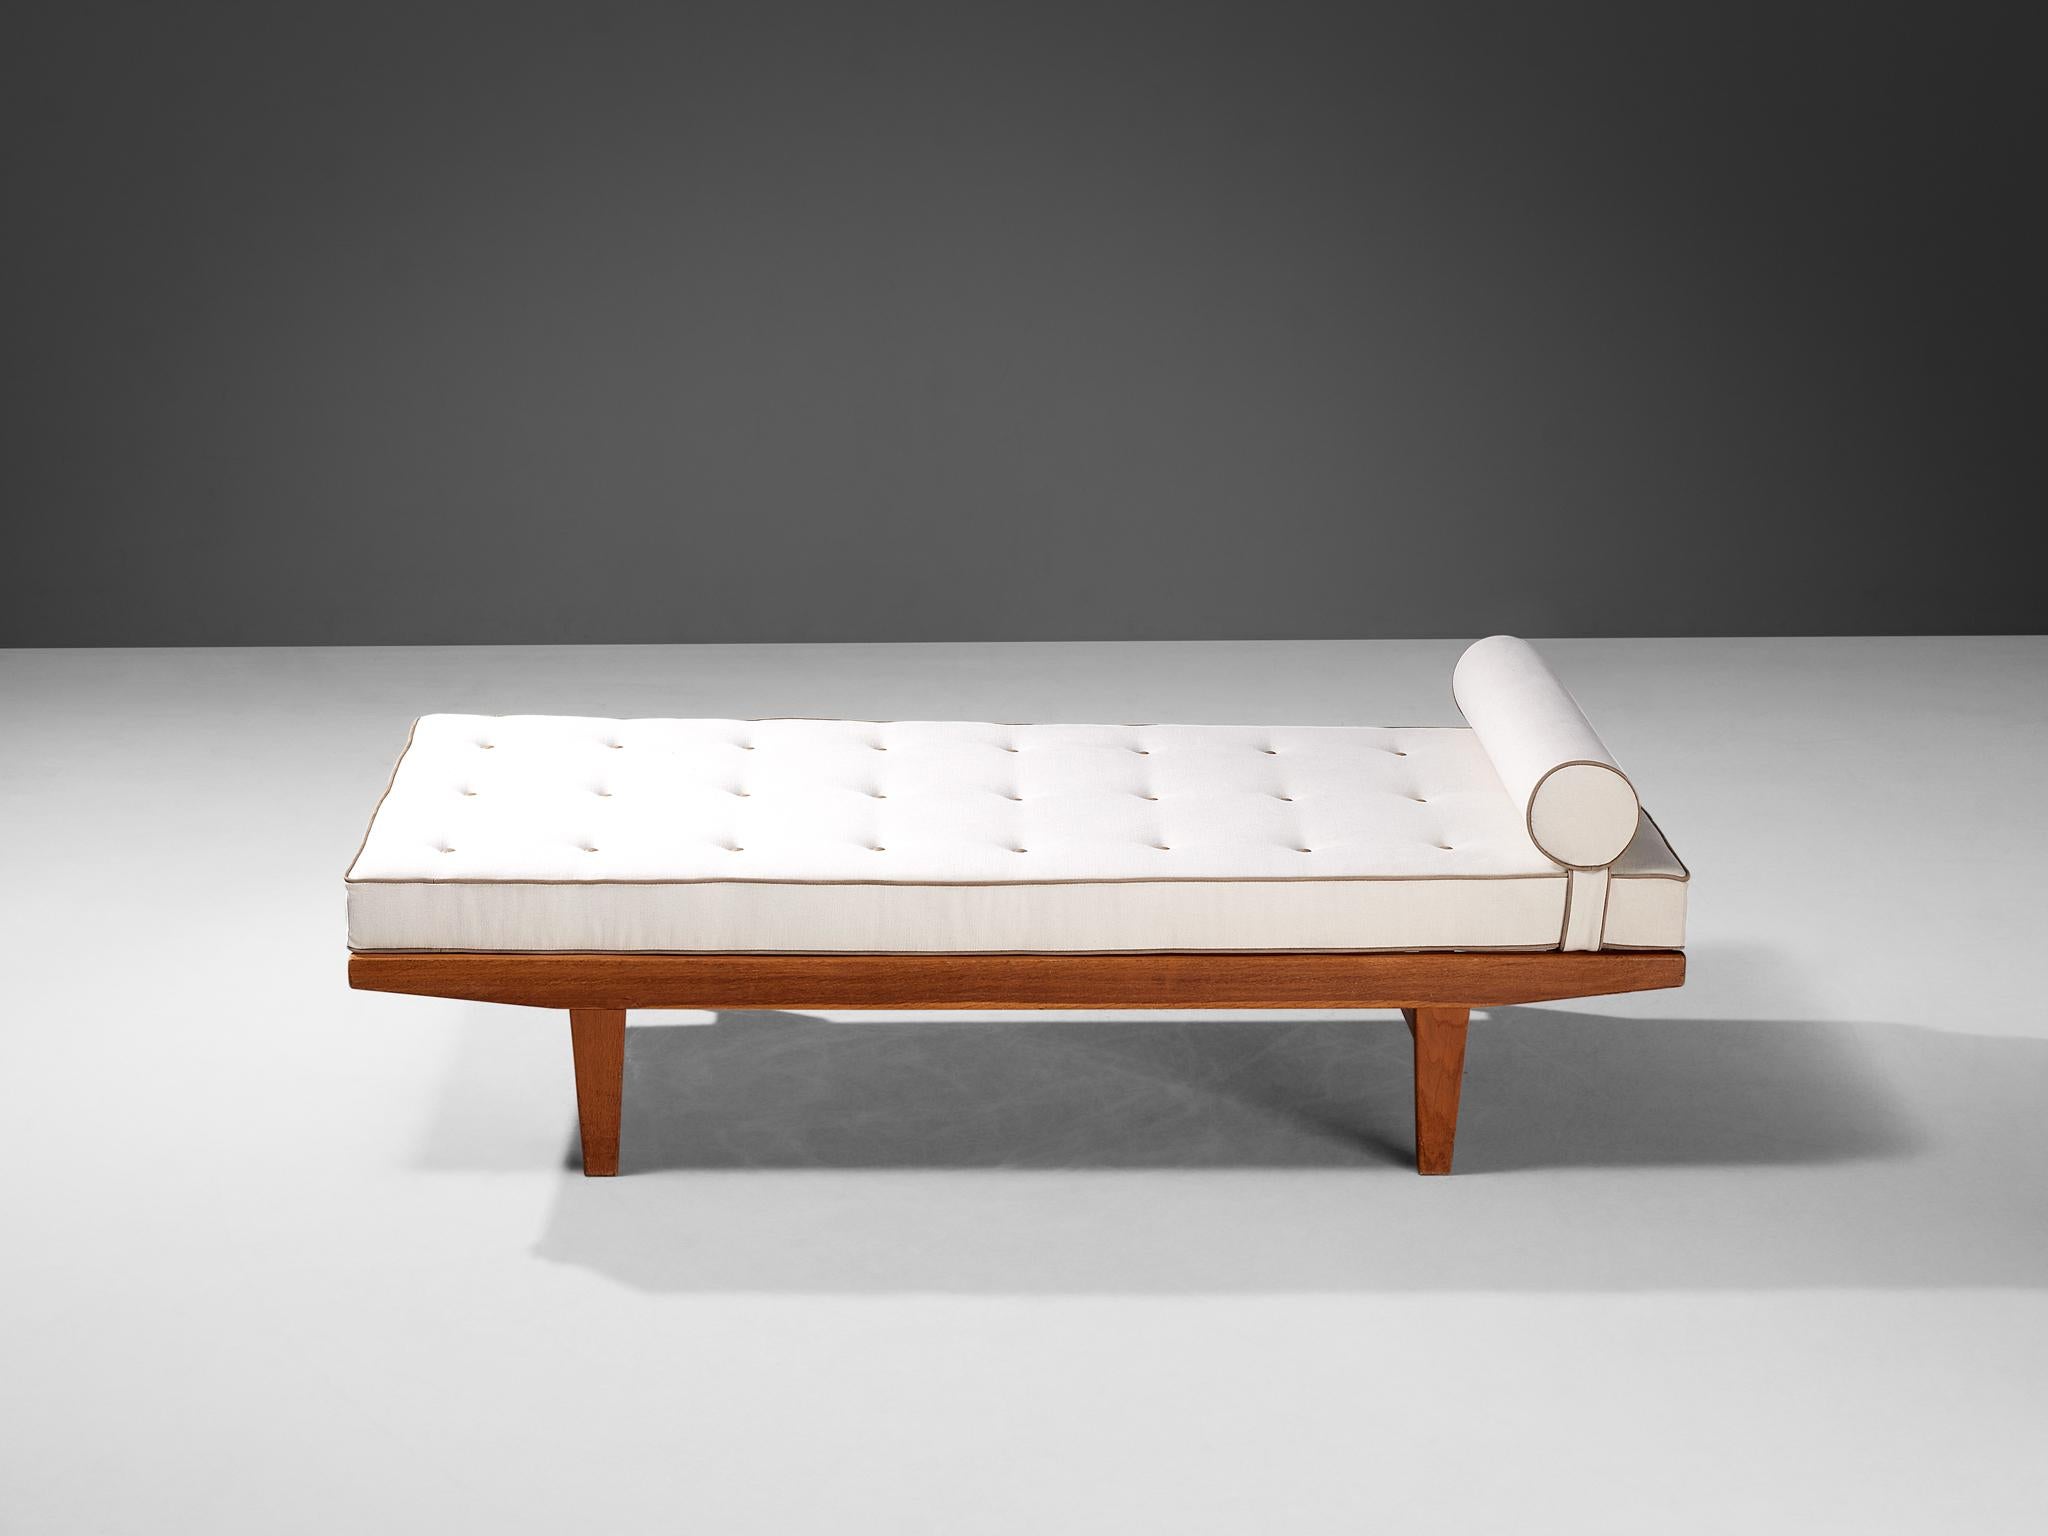 Poul M. Volther for FDB Møbler, daybed, oak, Denmark, 1960s

A simple and minimalist bed designed by Danish furniture designer Poul M. Volther (1923-2001). The construction is based on clear lines and angular shapes. Its simple and pure exterior